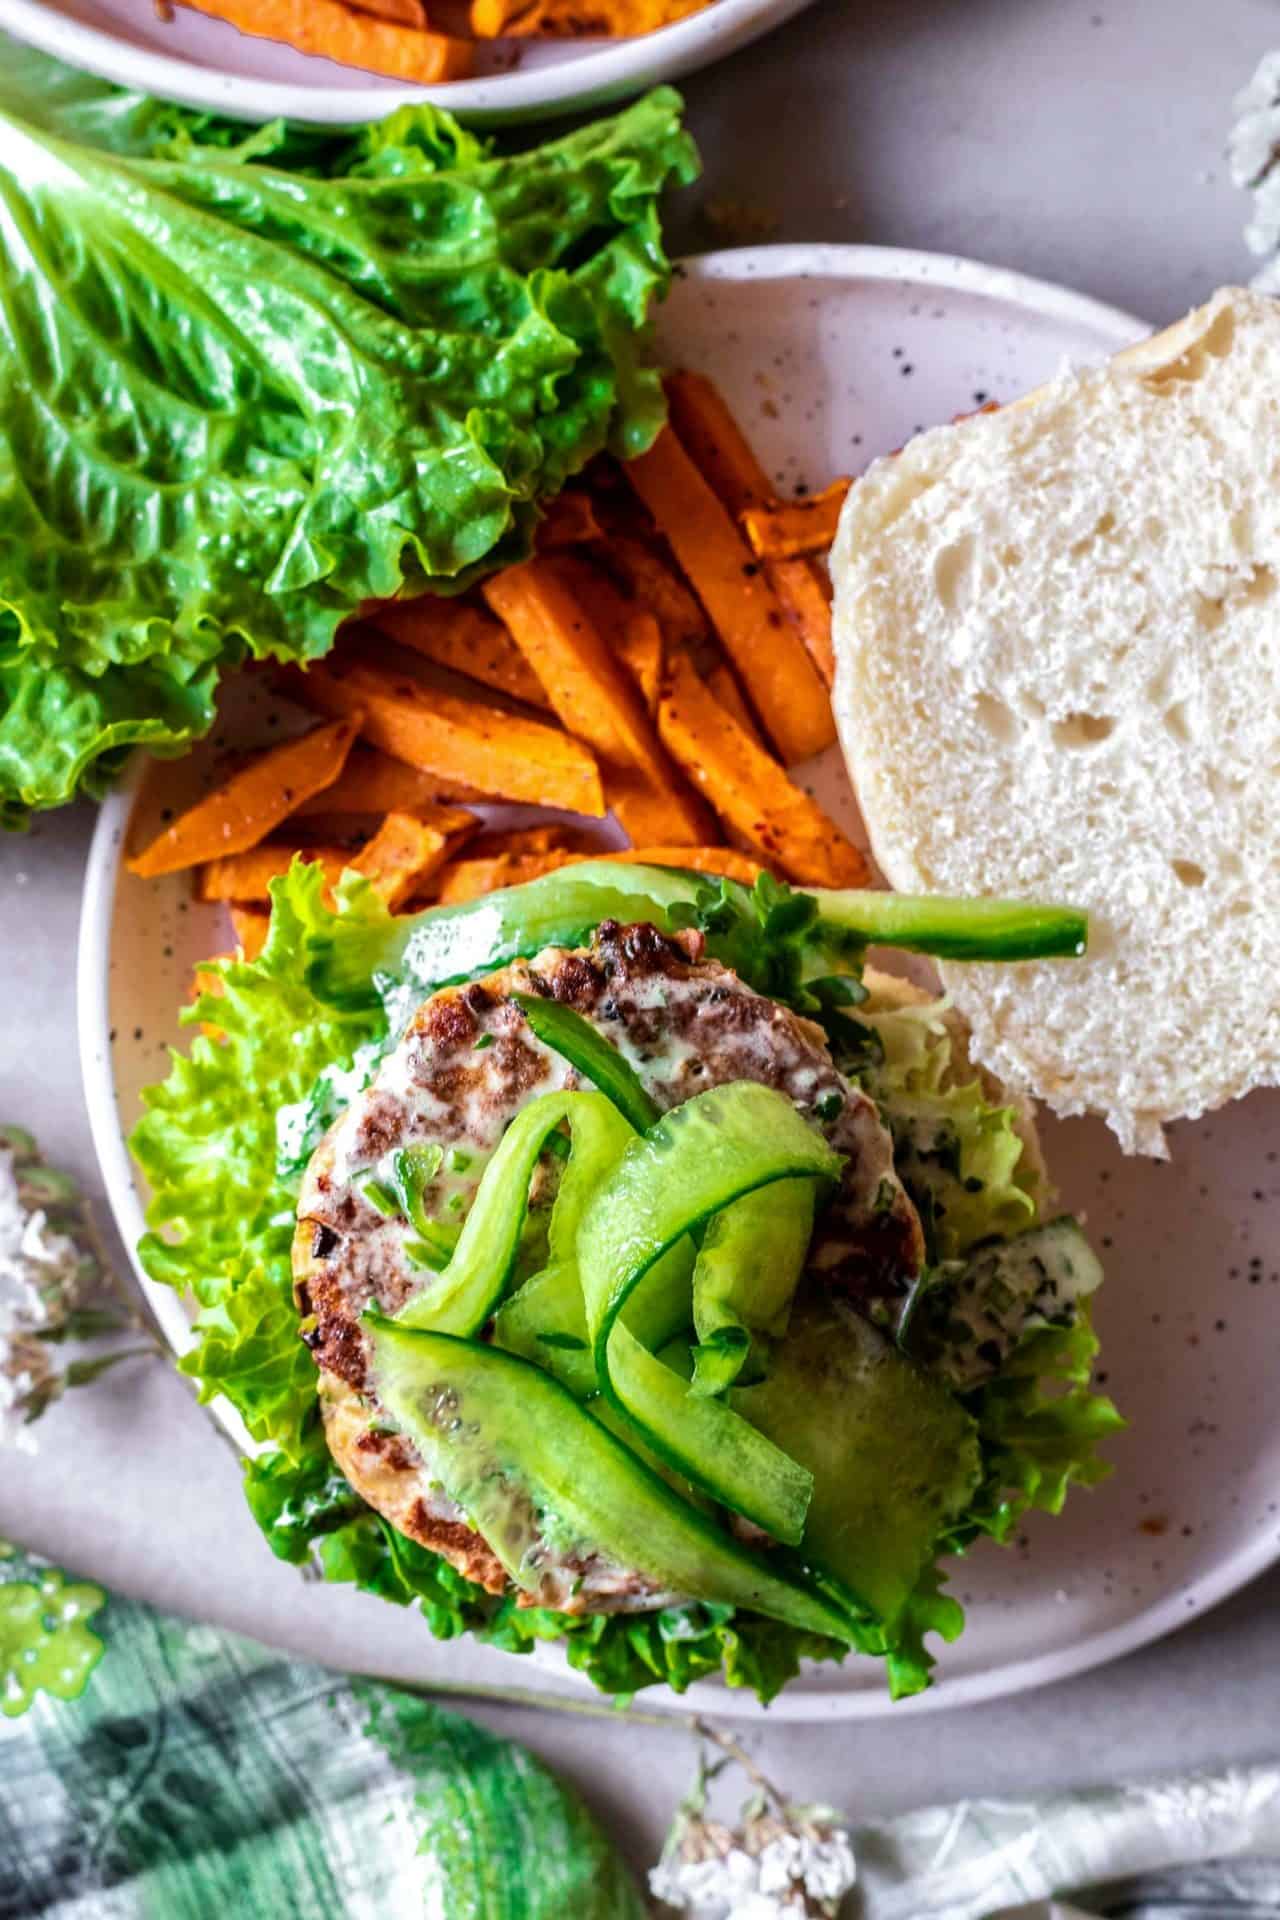 These easy tuna burgers have the perfect meaty texture, plus they are super flavorful, satisfying, hearty and seriously delicious!